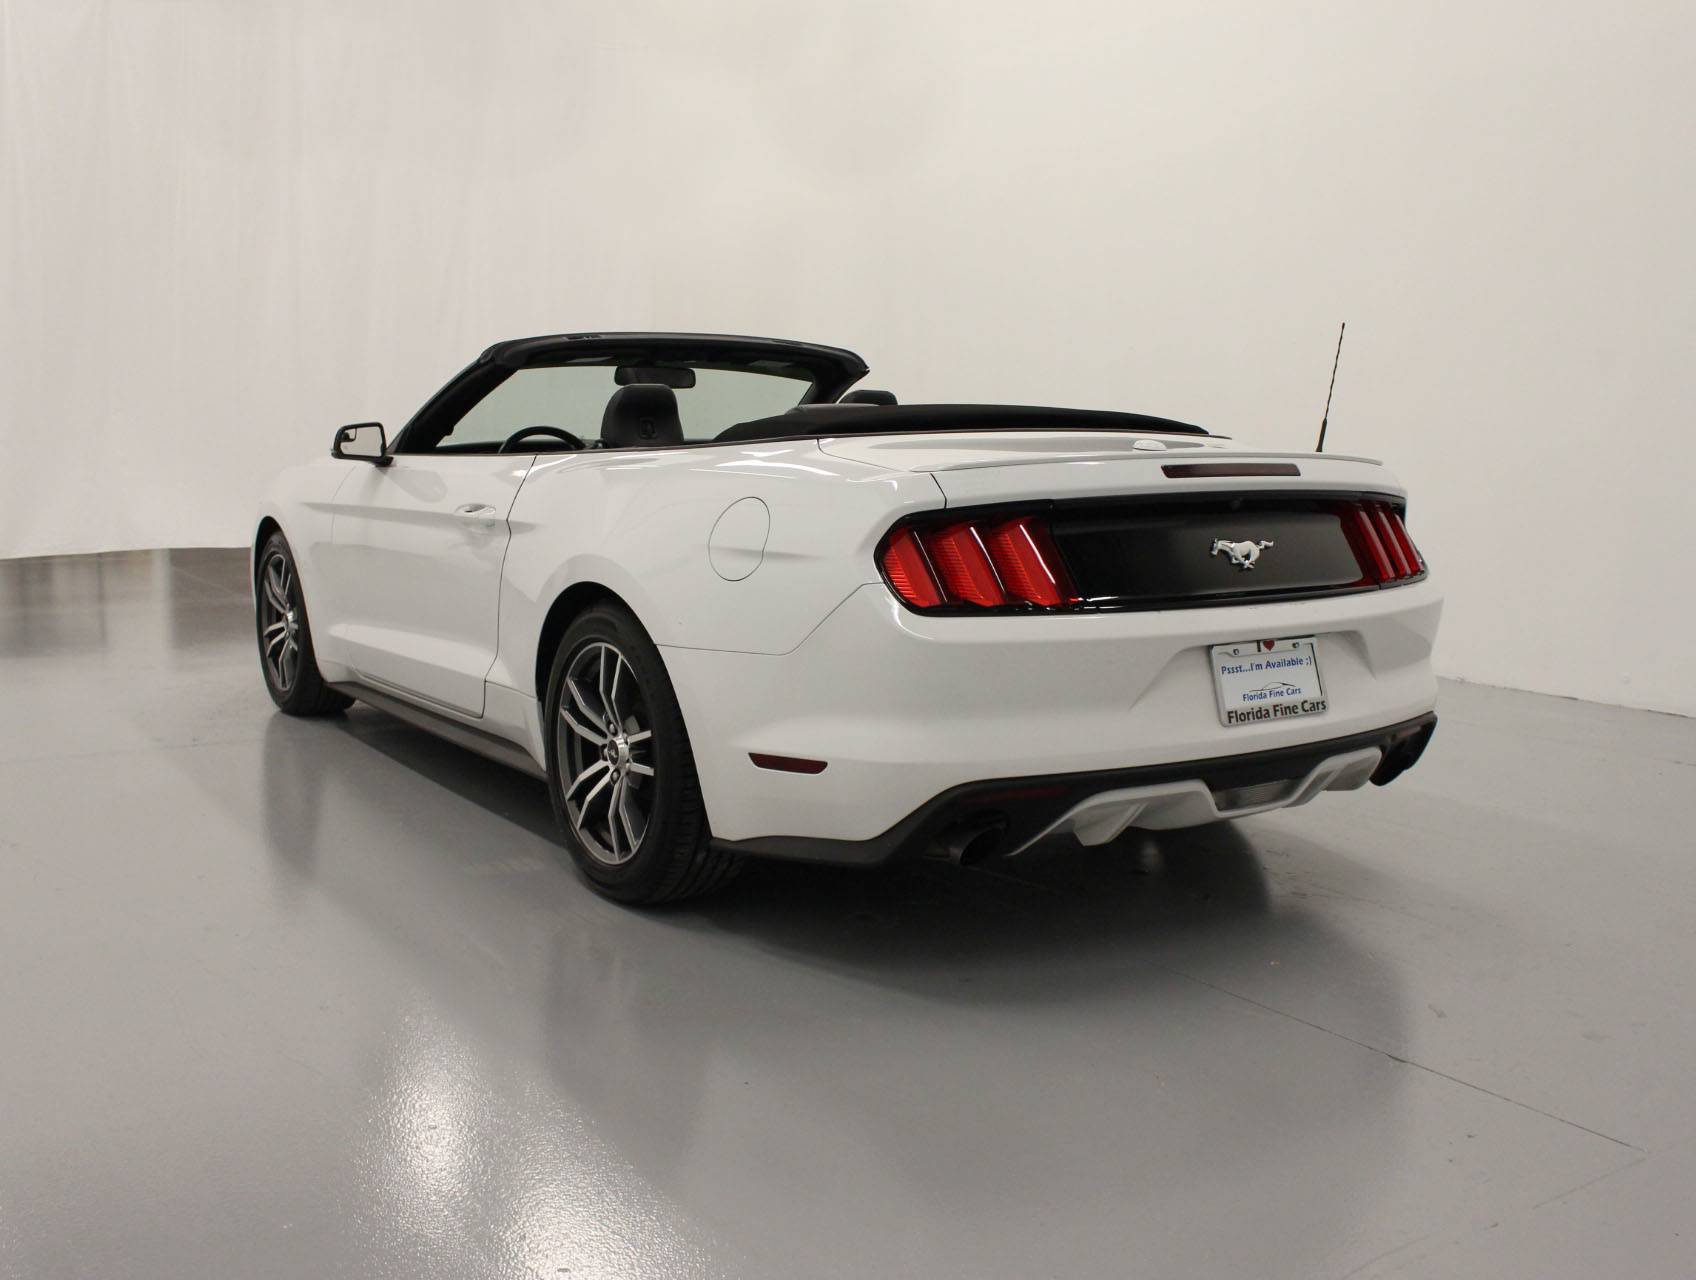 Florida Fine Cars - Used FORD MUSTANG 2017 HOLLYWOOD Ecoboost Premium